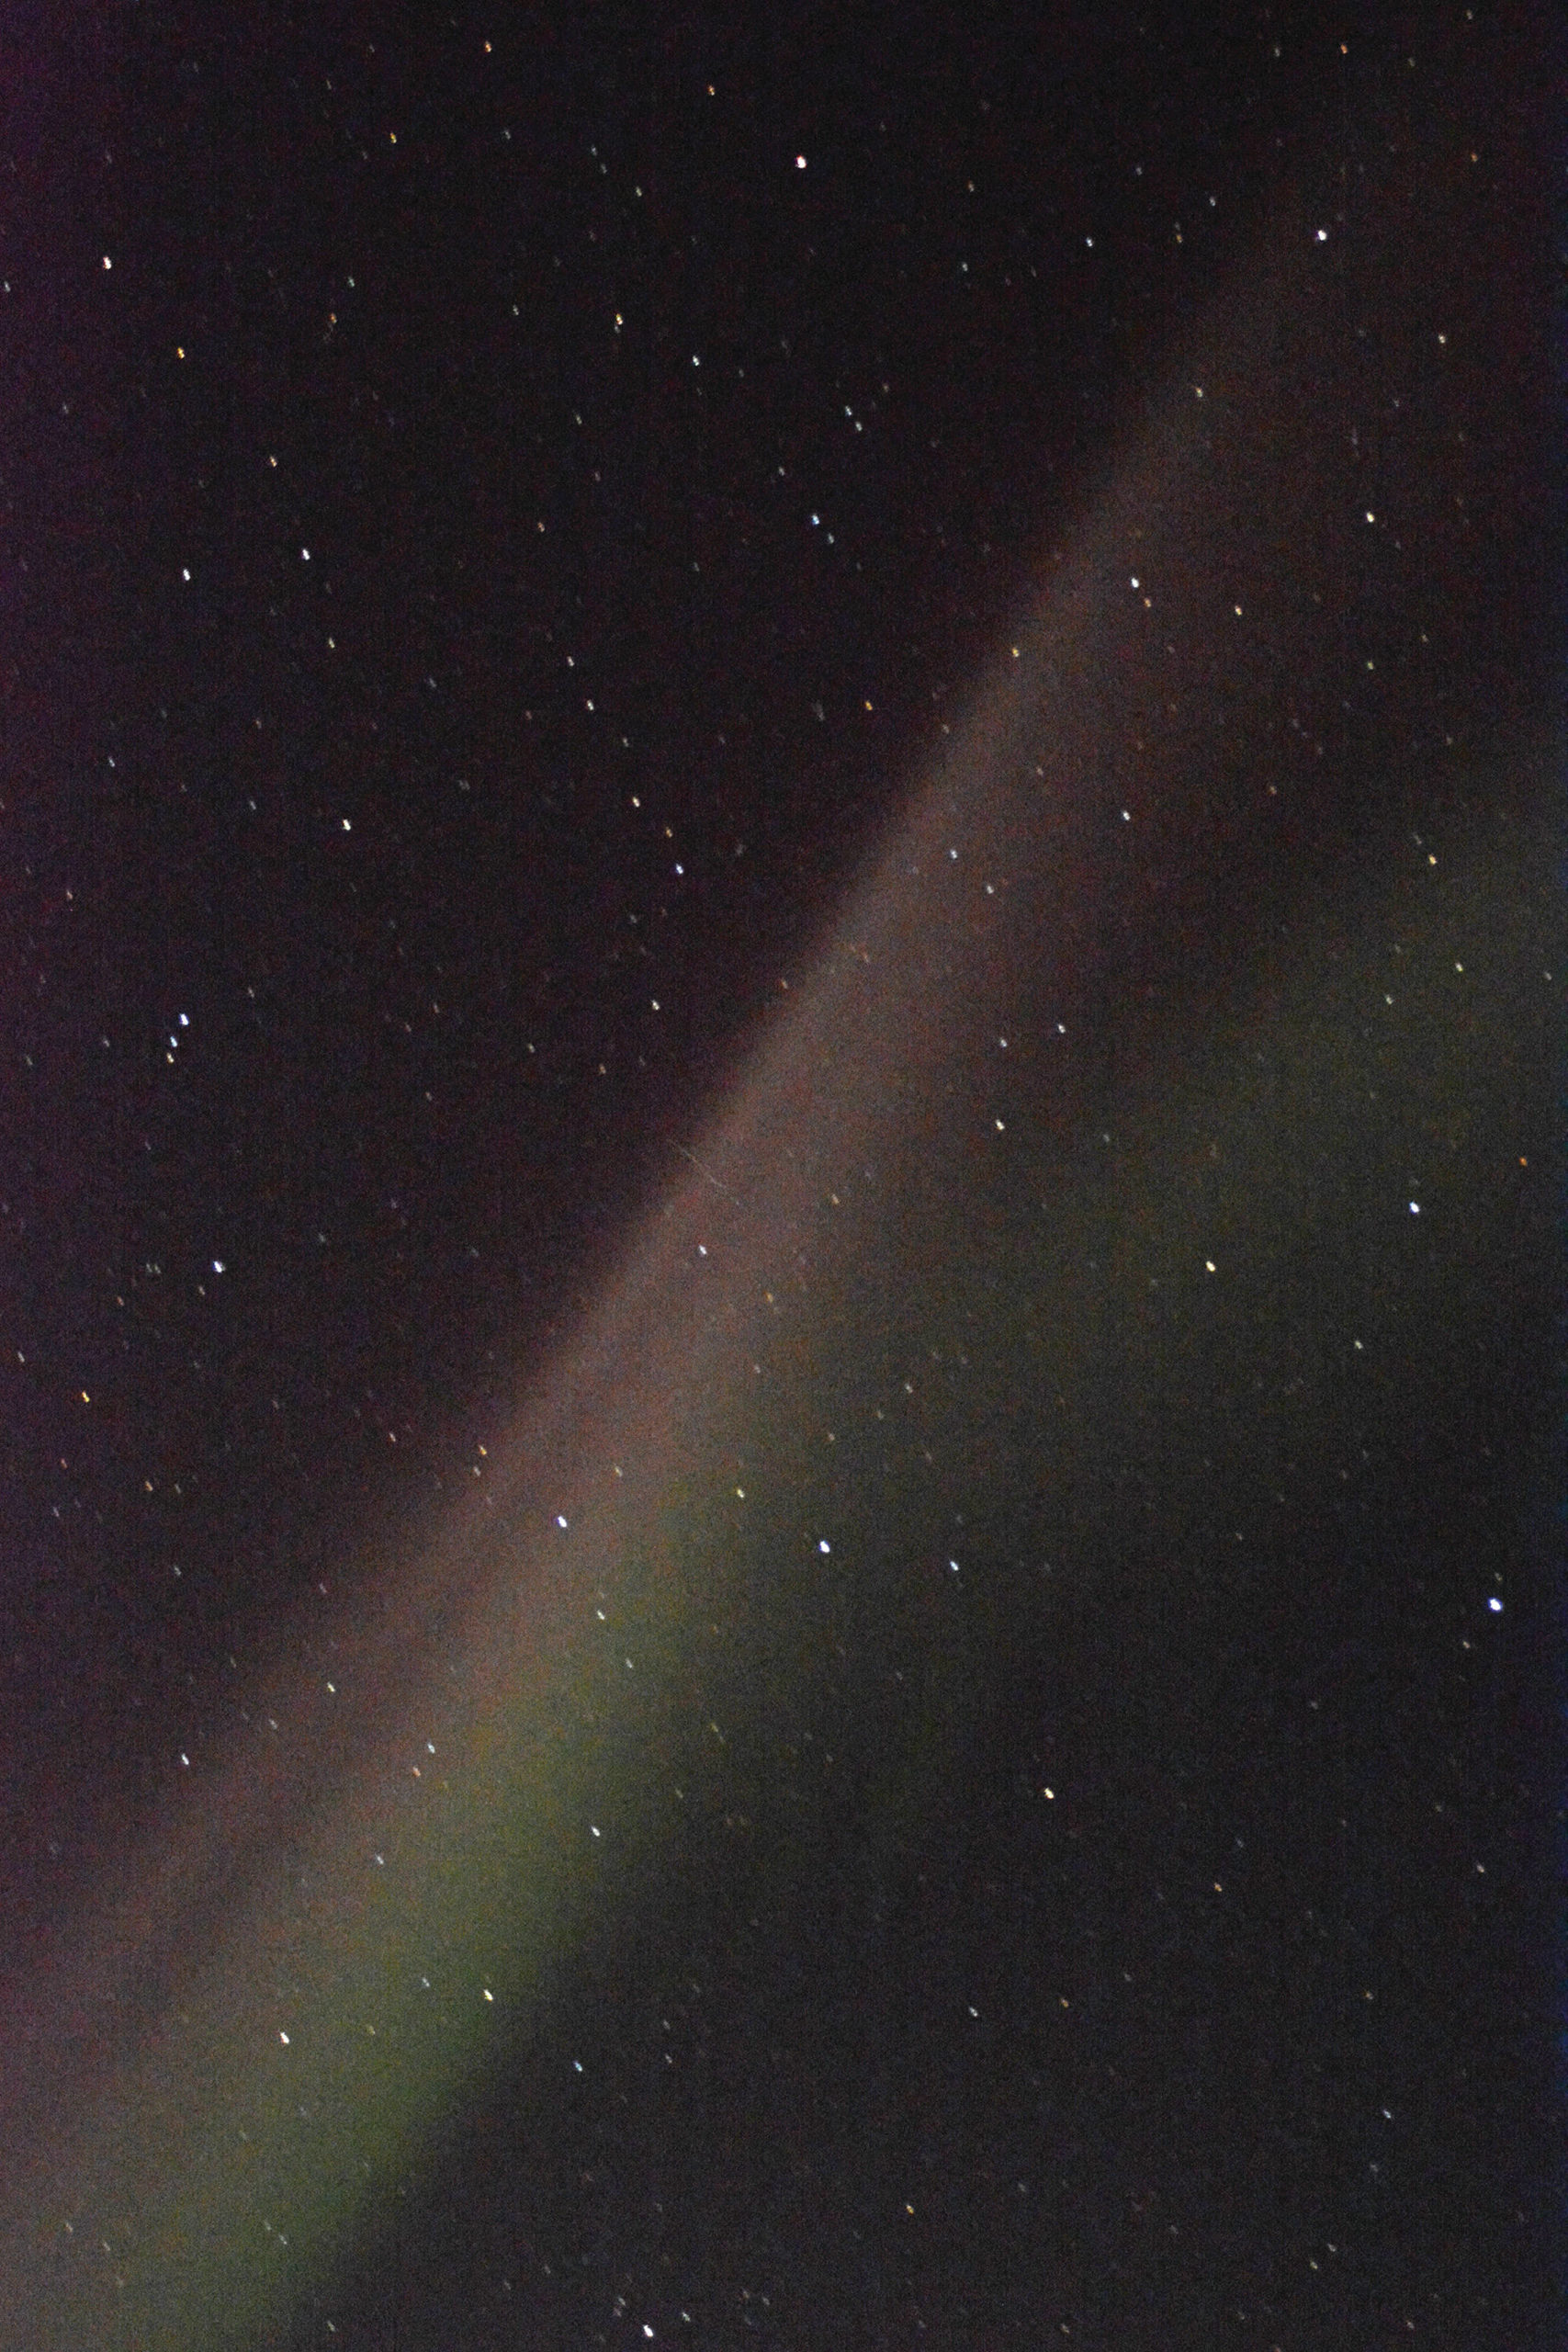 An atmospheric phenomena called STEVE — for “Sudden Thermal Emission from Velocity Enhancement” — is seen in the southern sky early on Saturday, April 17, 2021, from Diamond Ridge near Homer, Alaska. The STEVE appeared the same night as a strong display of auroras to the north. Don Hampton, a research associate and faculty member at the University of Alaska Fairbanks Geophysical Institute, said STEVEs are not auroras, but a stream of charged particles or sub-aurora polarization streams. “It’s actually primarily a different phenomena or mechanism that is creating light,” Hampton said of STEVEs. A STEVE is more of a broadband emission than an aurora and can be distinguished by its color of light. Auroras tend to be green or vivid red, while a STEVE appears white to the human eye and may have tinges of red. Hampton said scientists knew about streams of charged particles that are not auroras, but hadn’t thought to look if there’s an optical phenomena associated with. Aurora chasers in Canada first noticed the optical phenomena in 2014, and it was named by Chris Ratzlaff as a joke reference to the film “Over the Hedge,” where the animals called the hedge “Steve.” NASA scientist Elizabeth Macdonald came up with the description. “It’s pretty cool,” Hampton said. “The whole history of the STEVE is that it’s a citizen scientist discovery.” (Photo by Michael Armstrong/Homer News)